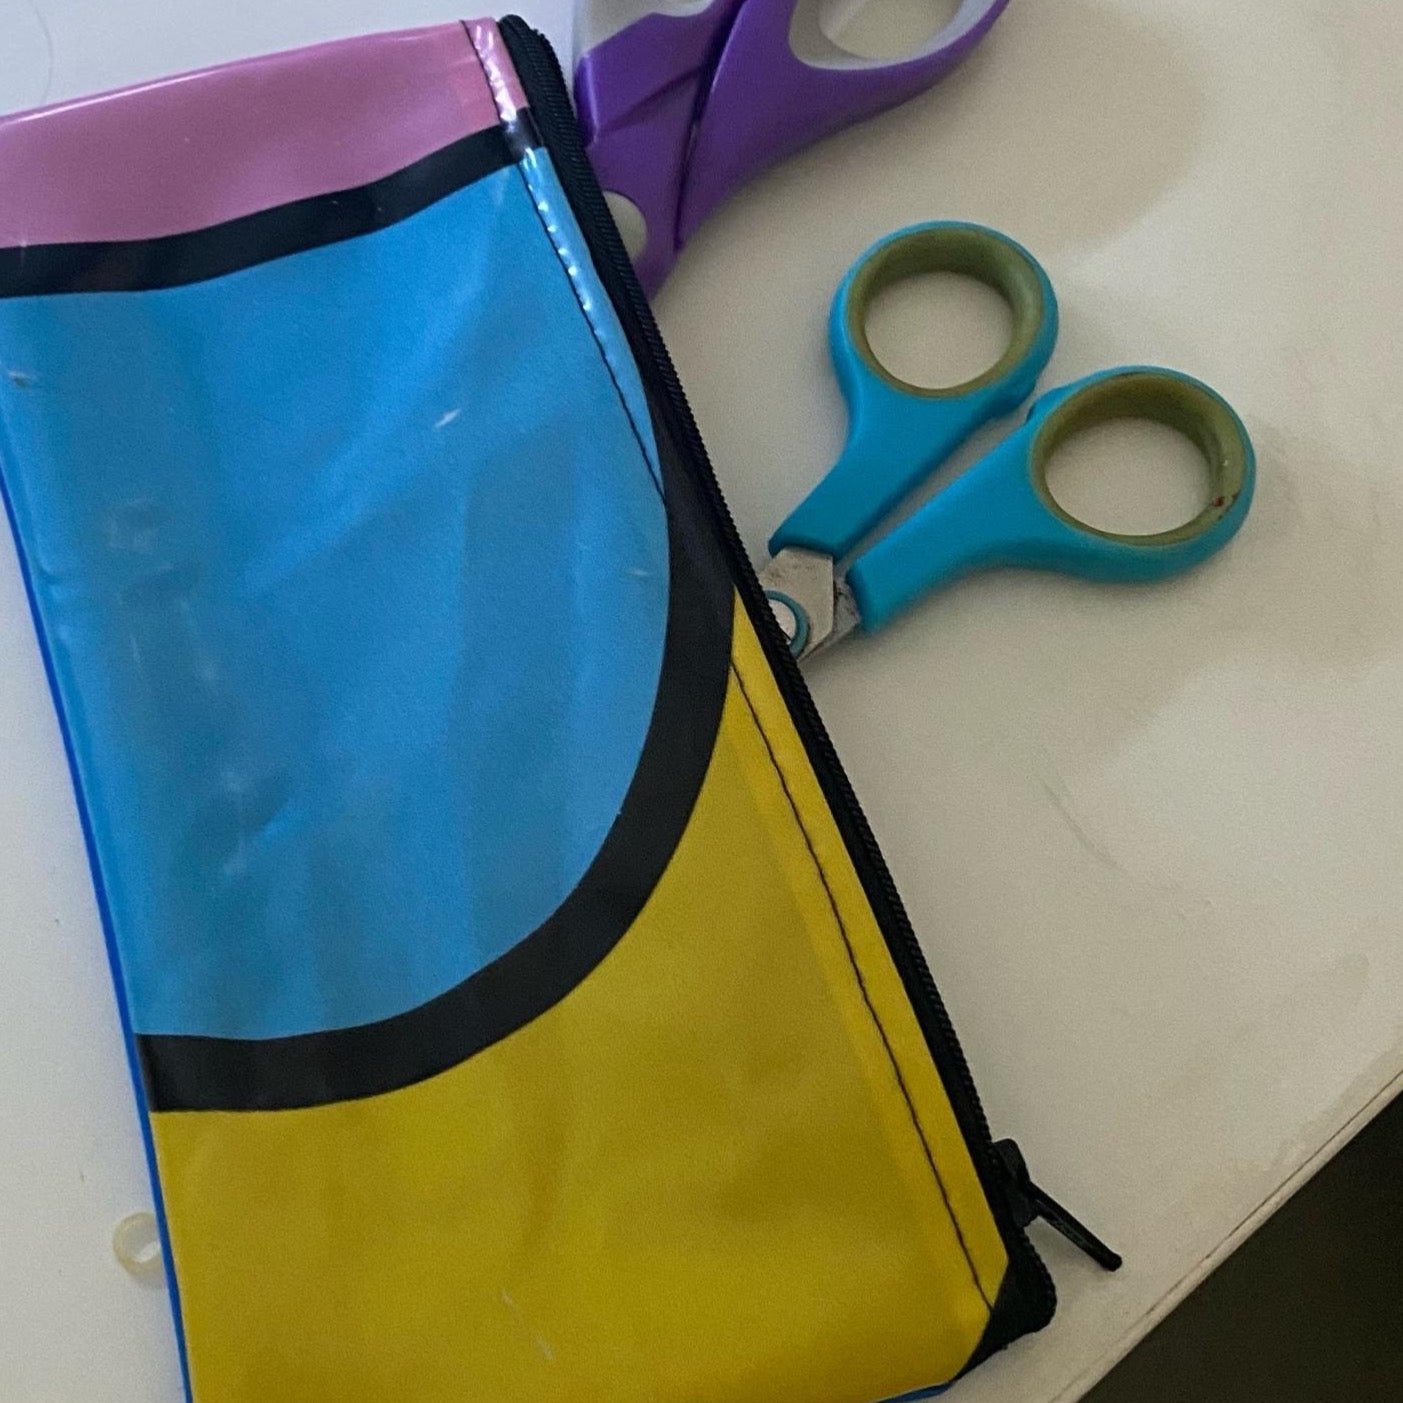 Medium size purse made from recycled pool inflatables ideal as pencil case or for mobile phone, sunglasses or cosmetics.